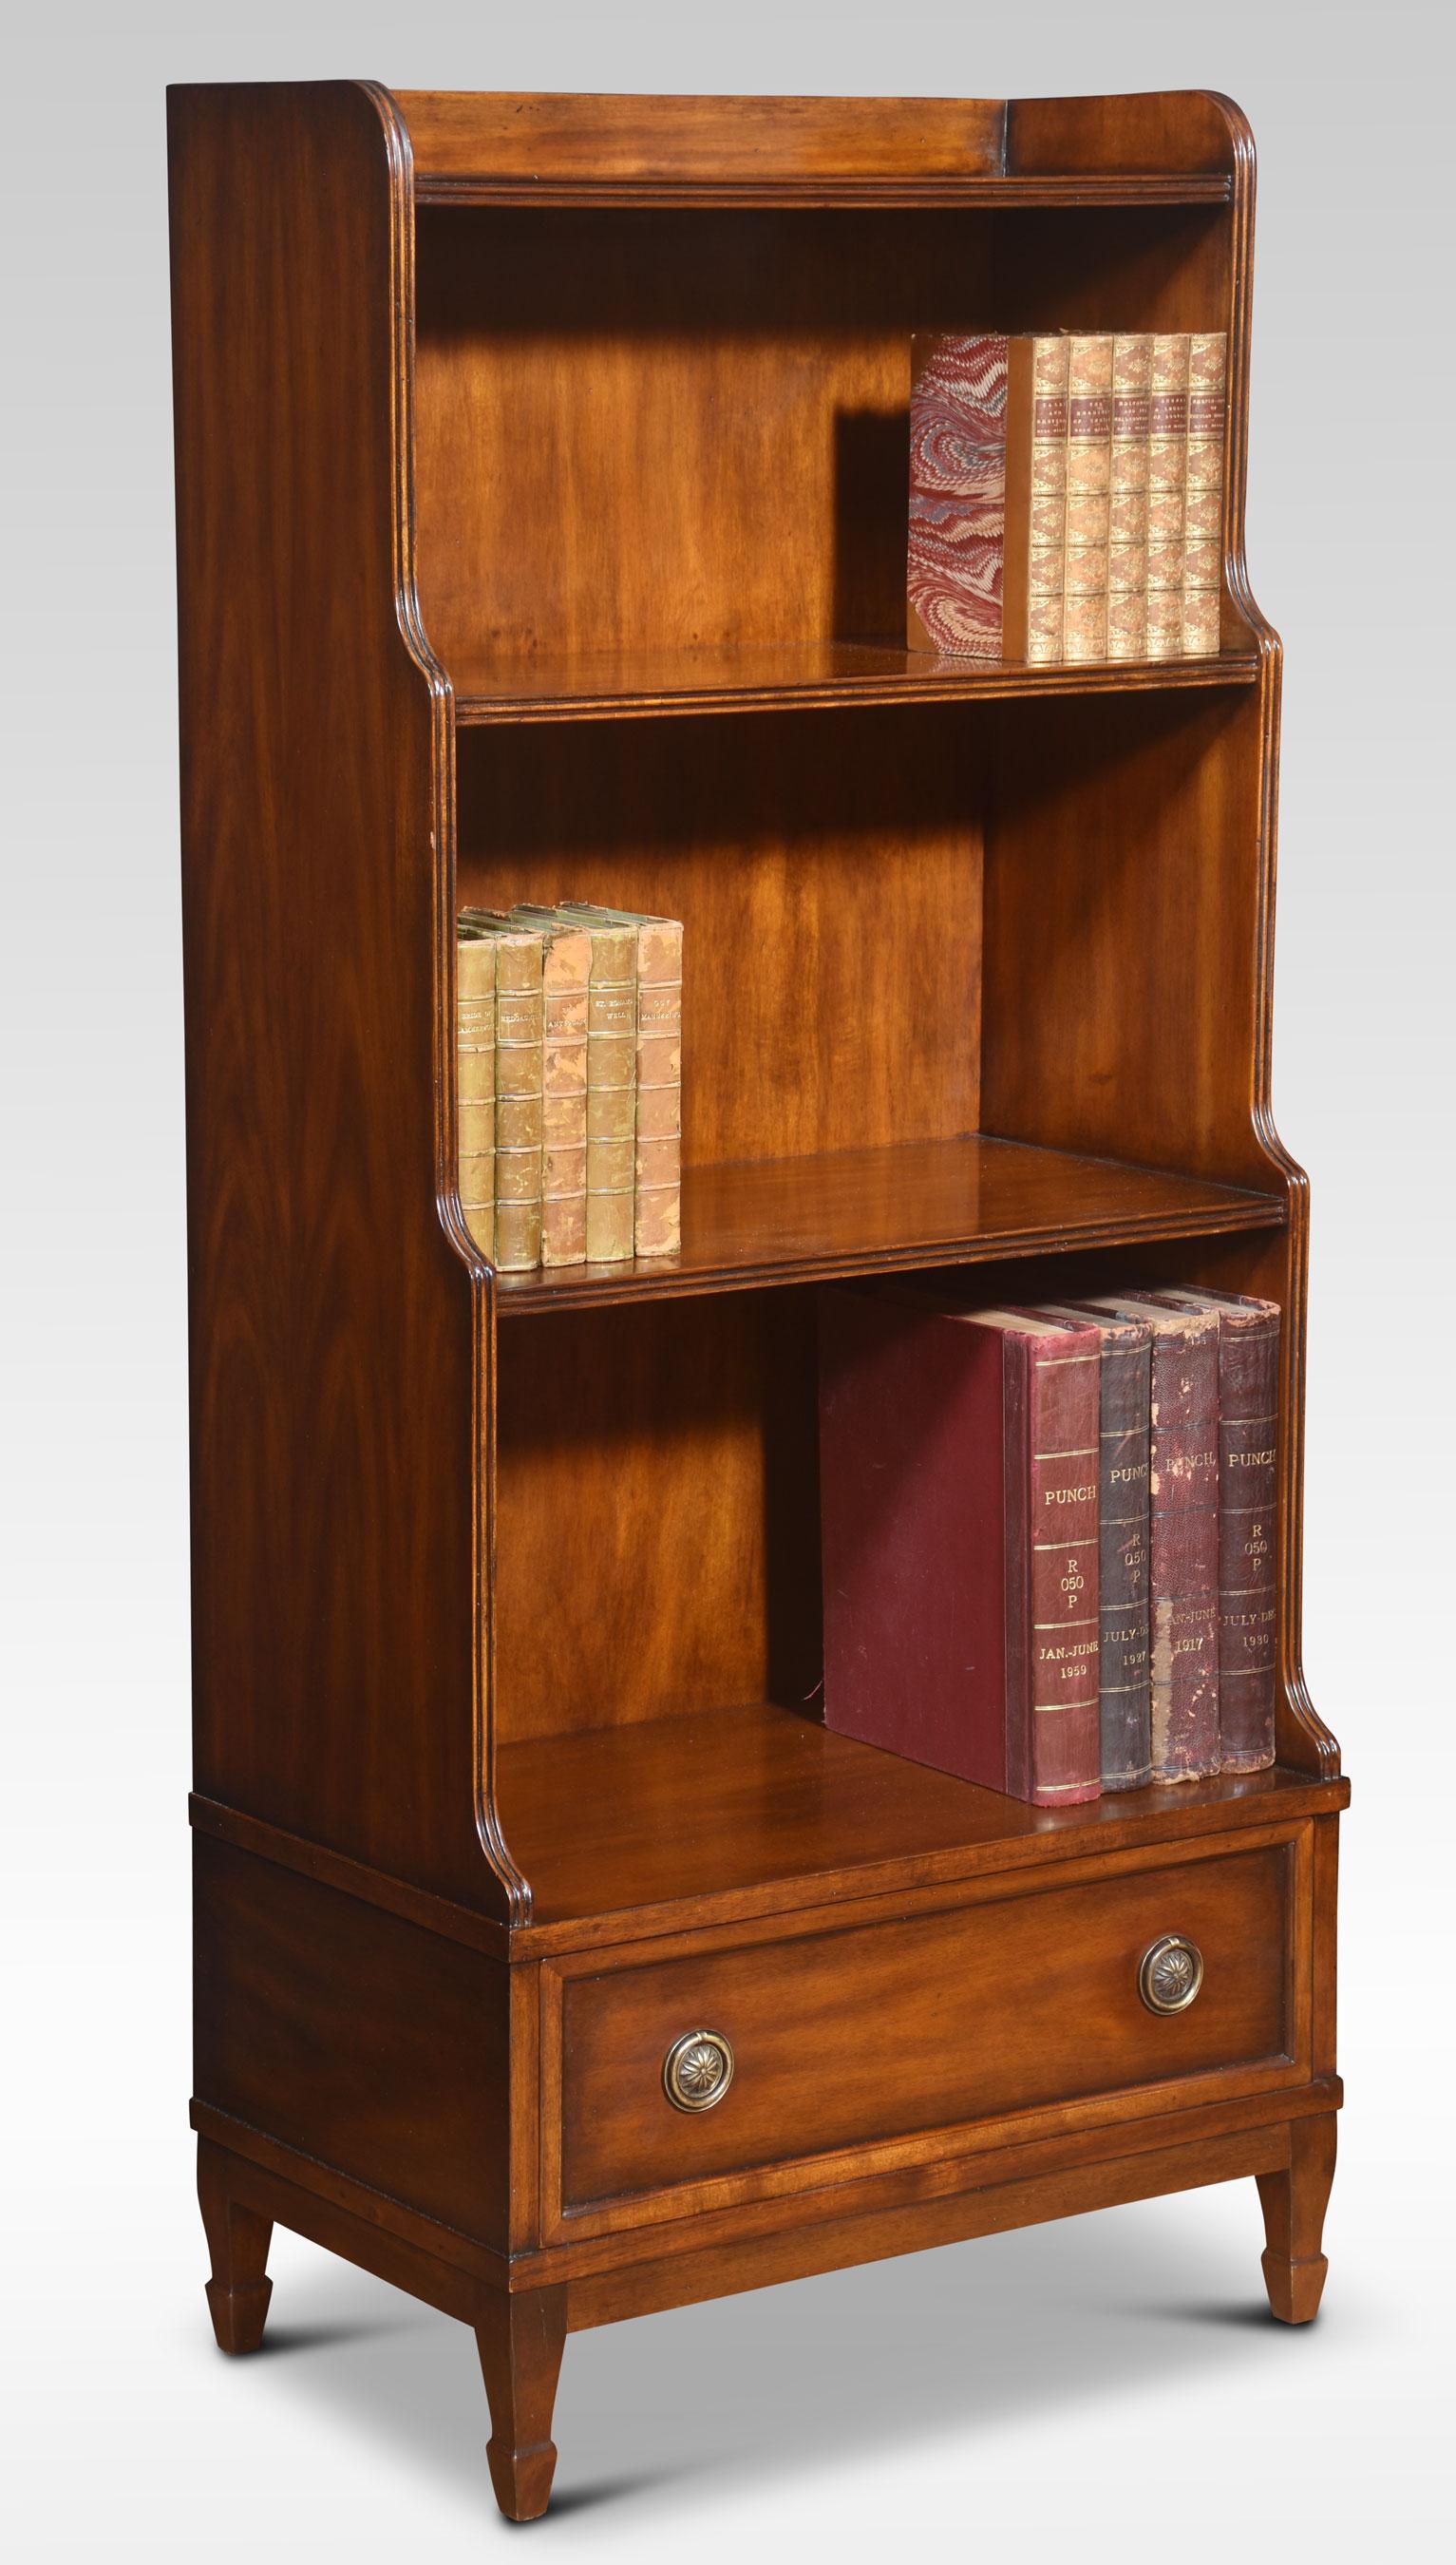 Pair of waterfall bookcases, having three graduated shelves above long drawer with brass knob handles. The base is fitted with one long draw and brass-turned knob handles. All raised up on tapering legs terminating in spade feet.
Dimensions
Height